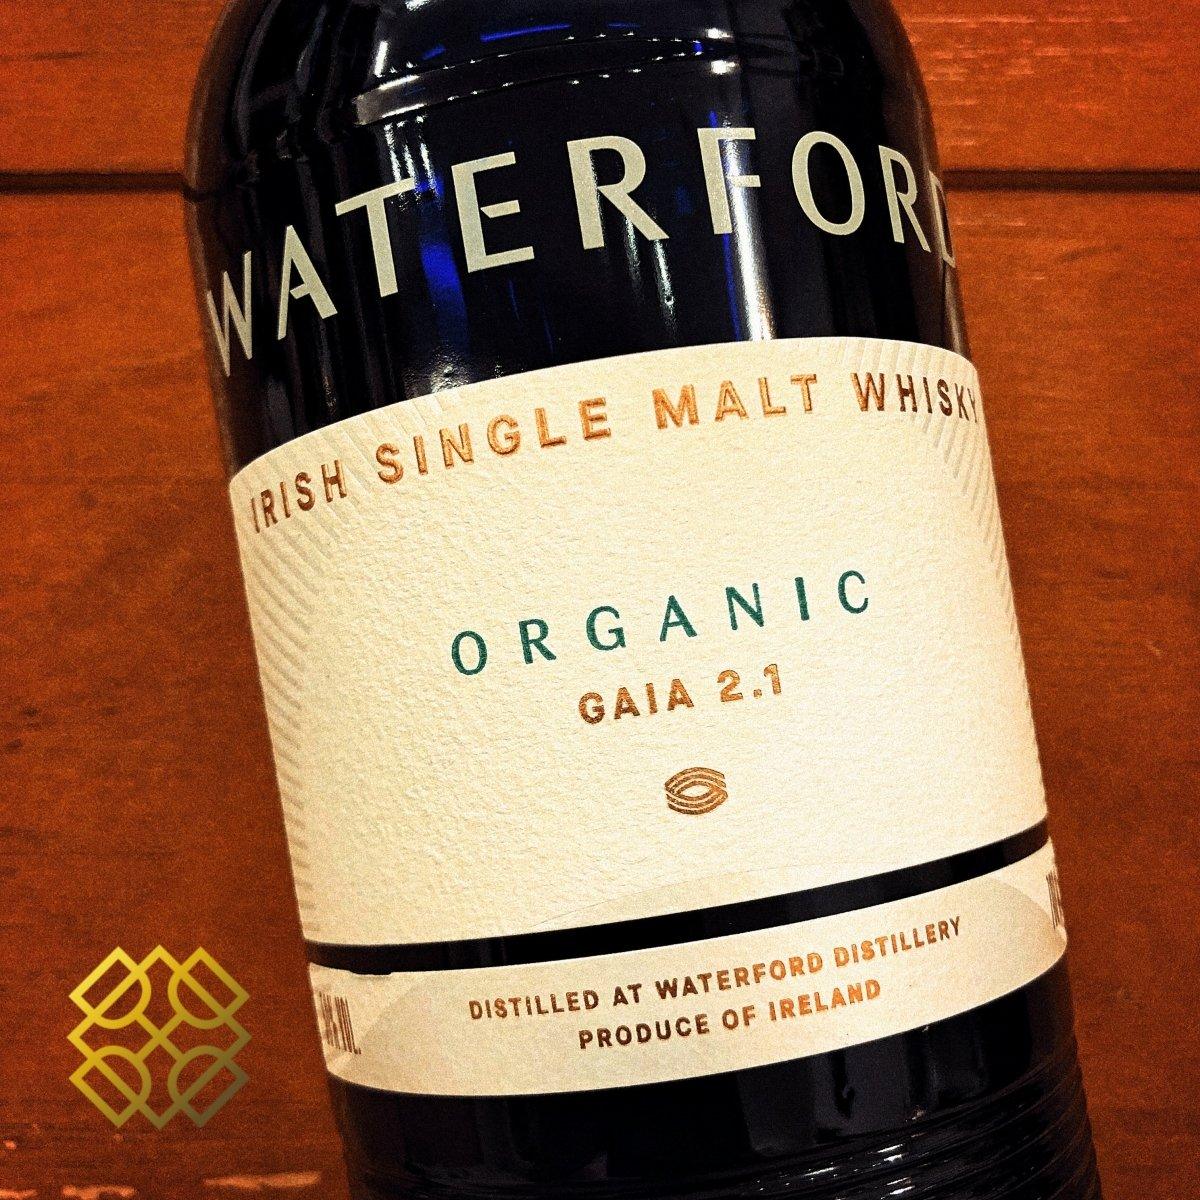 Waterford - Gaia 2.1 Organic - Irish Whiskey - Country_Ireland - Distillery_Waterford - New Arrivals- - -